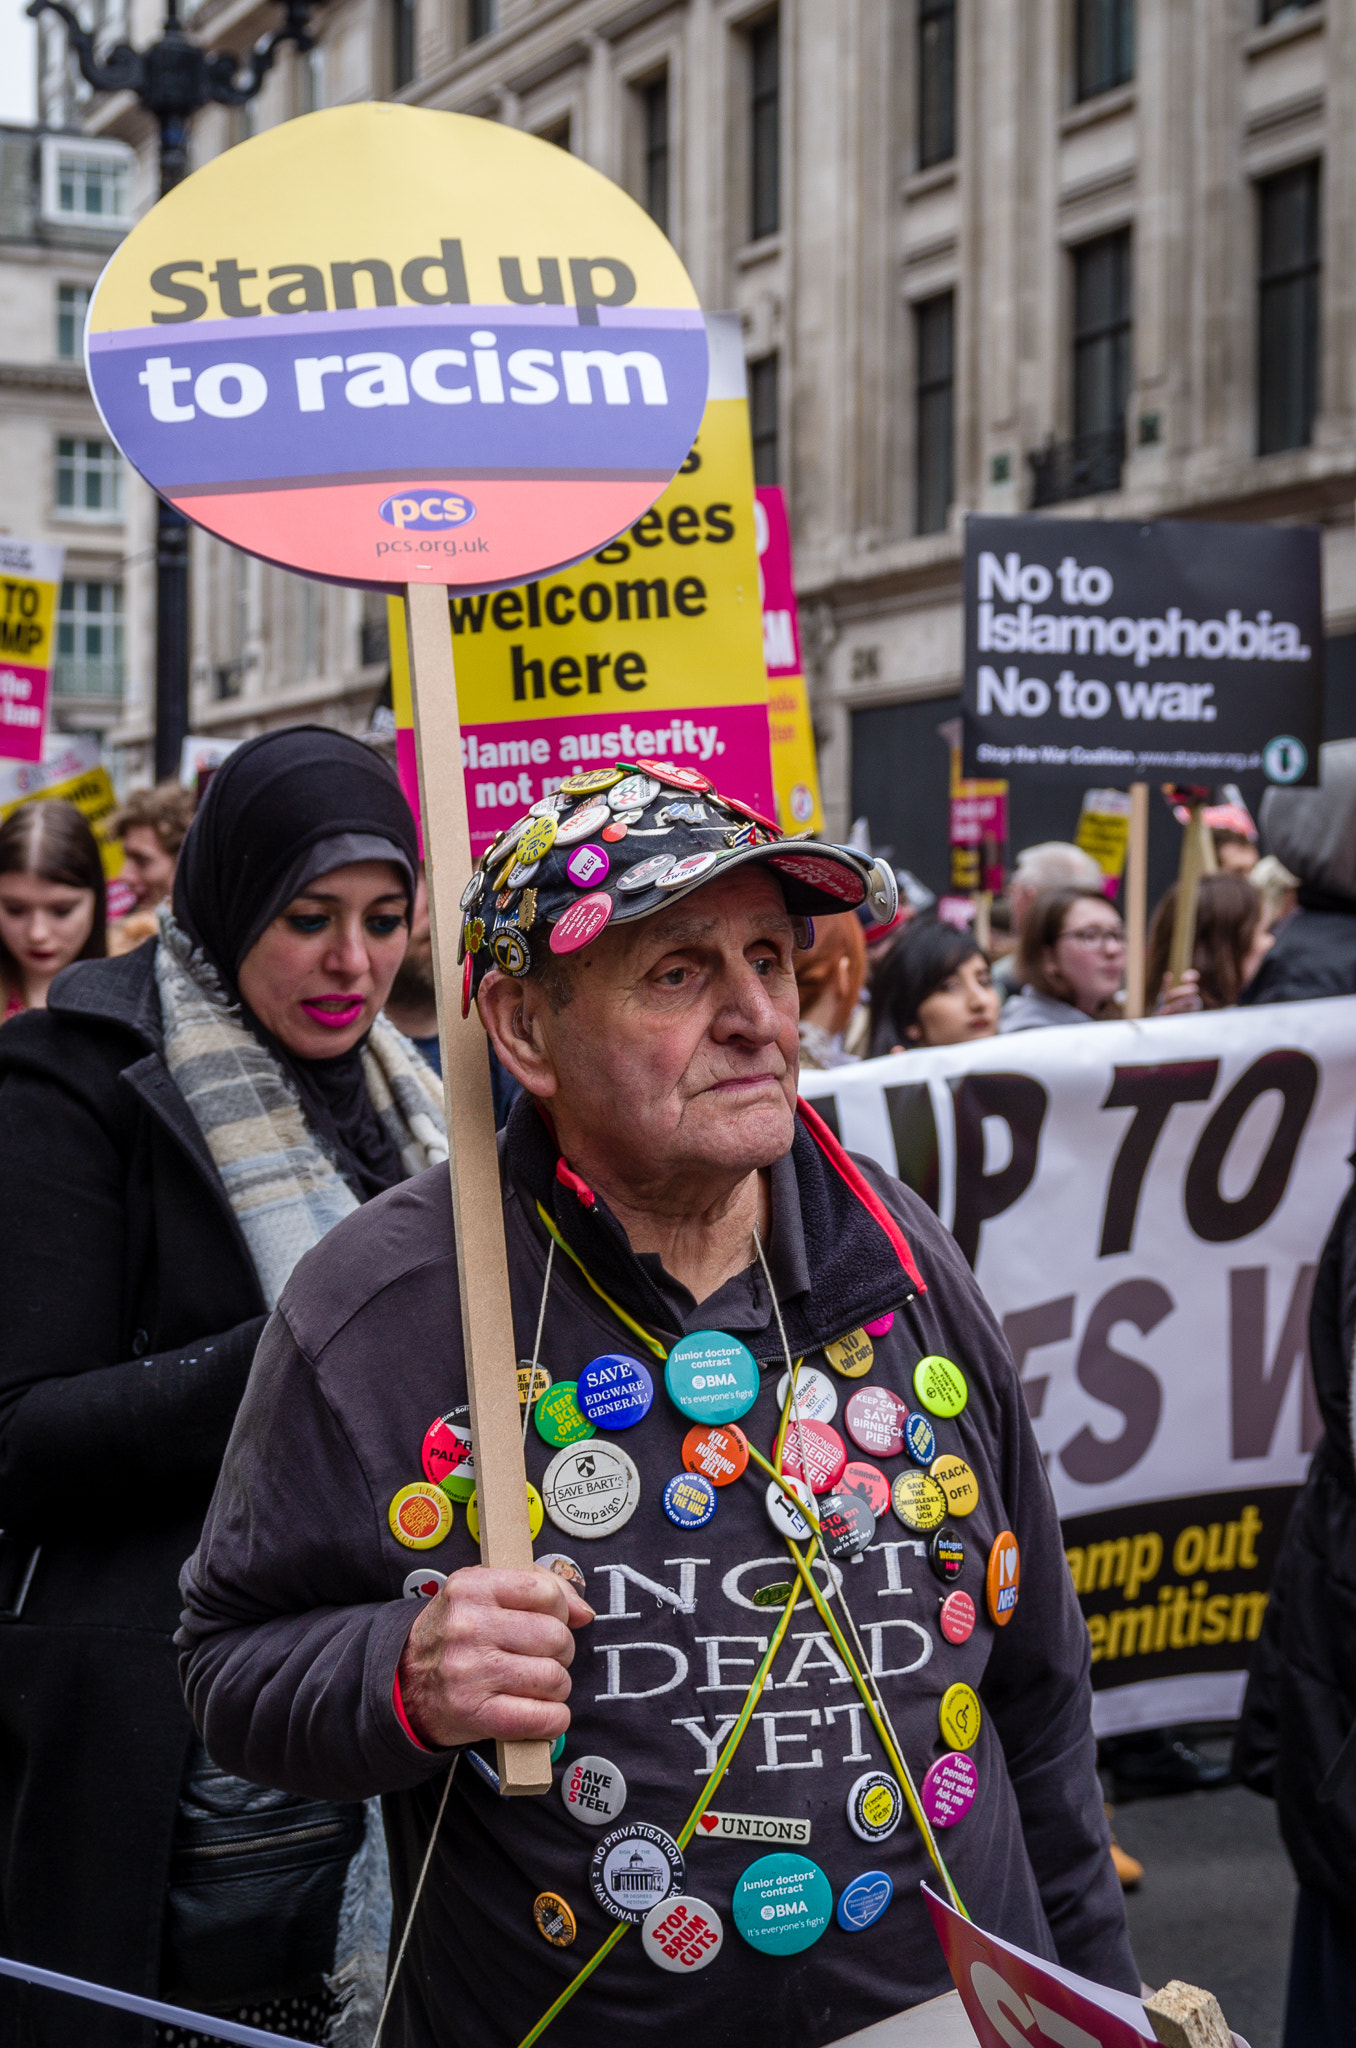 Pentax smc DA* 16-50mm F2.8 ED AL (IF) SDM sample photo. Stand up to racism march, london, march 2017 photography